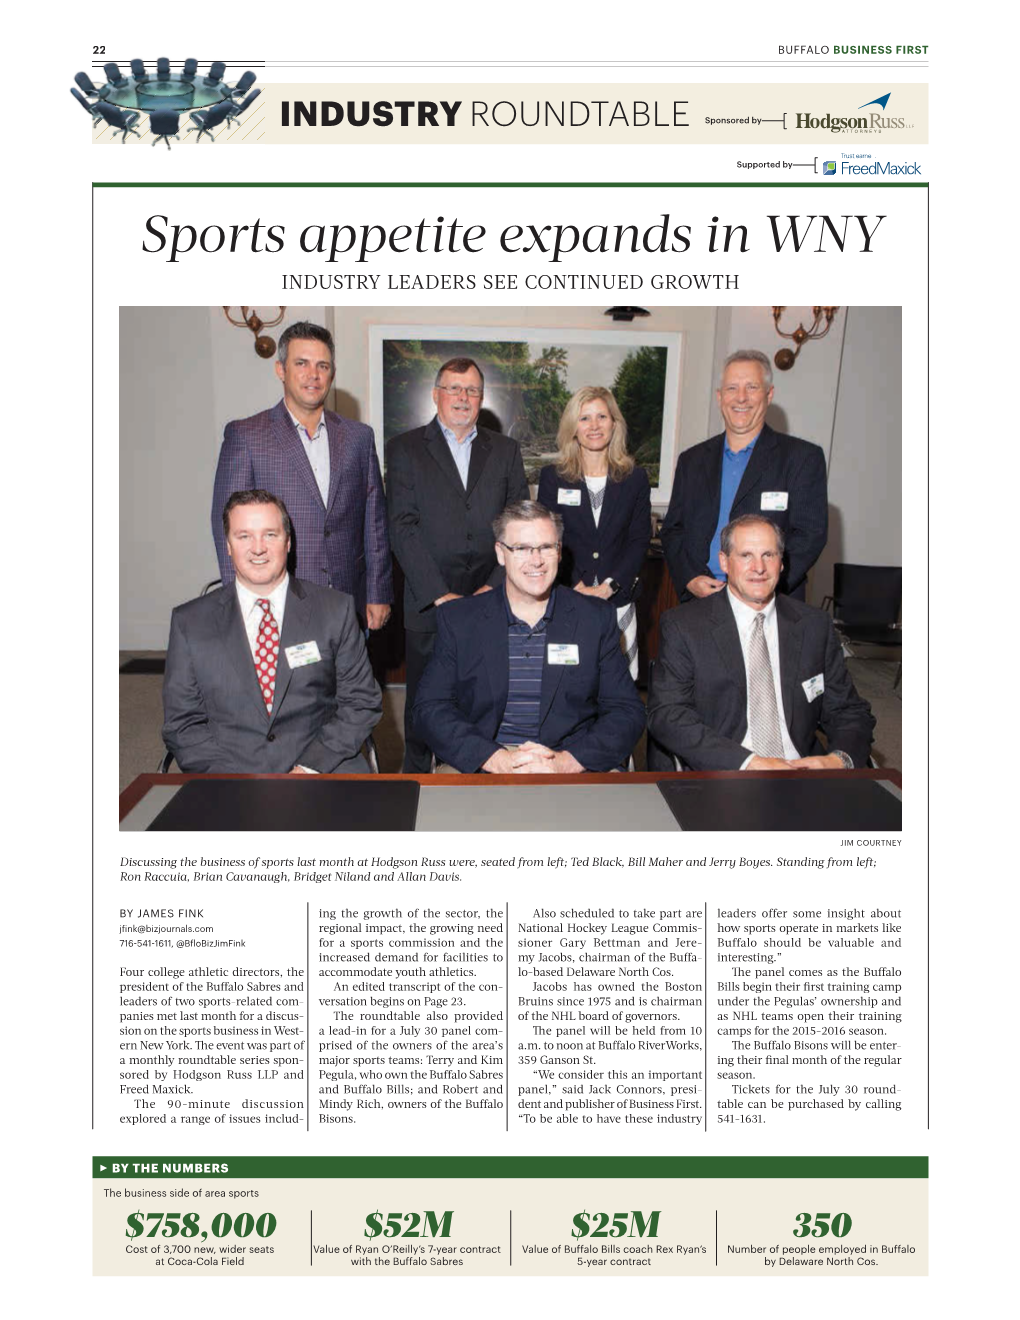 Sports Appetite Expands in WNY INDUSTRY LEADERS SEE CONTINUED GROWTH